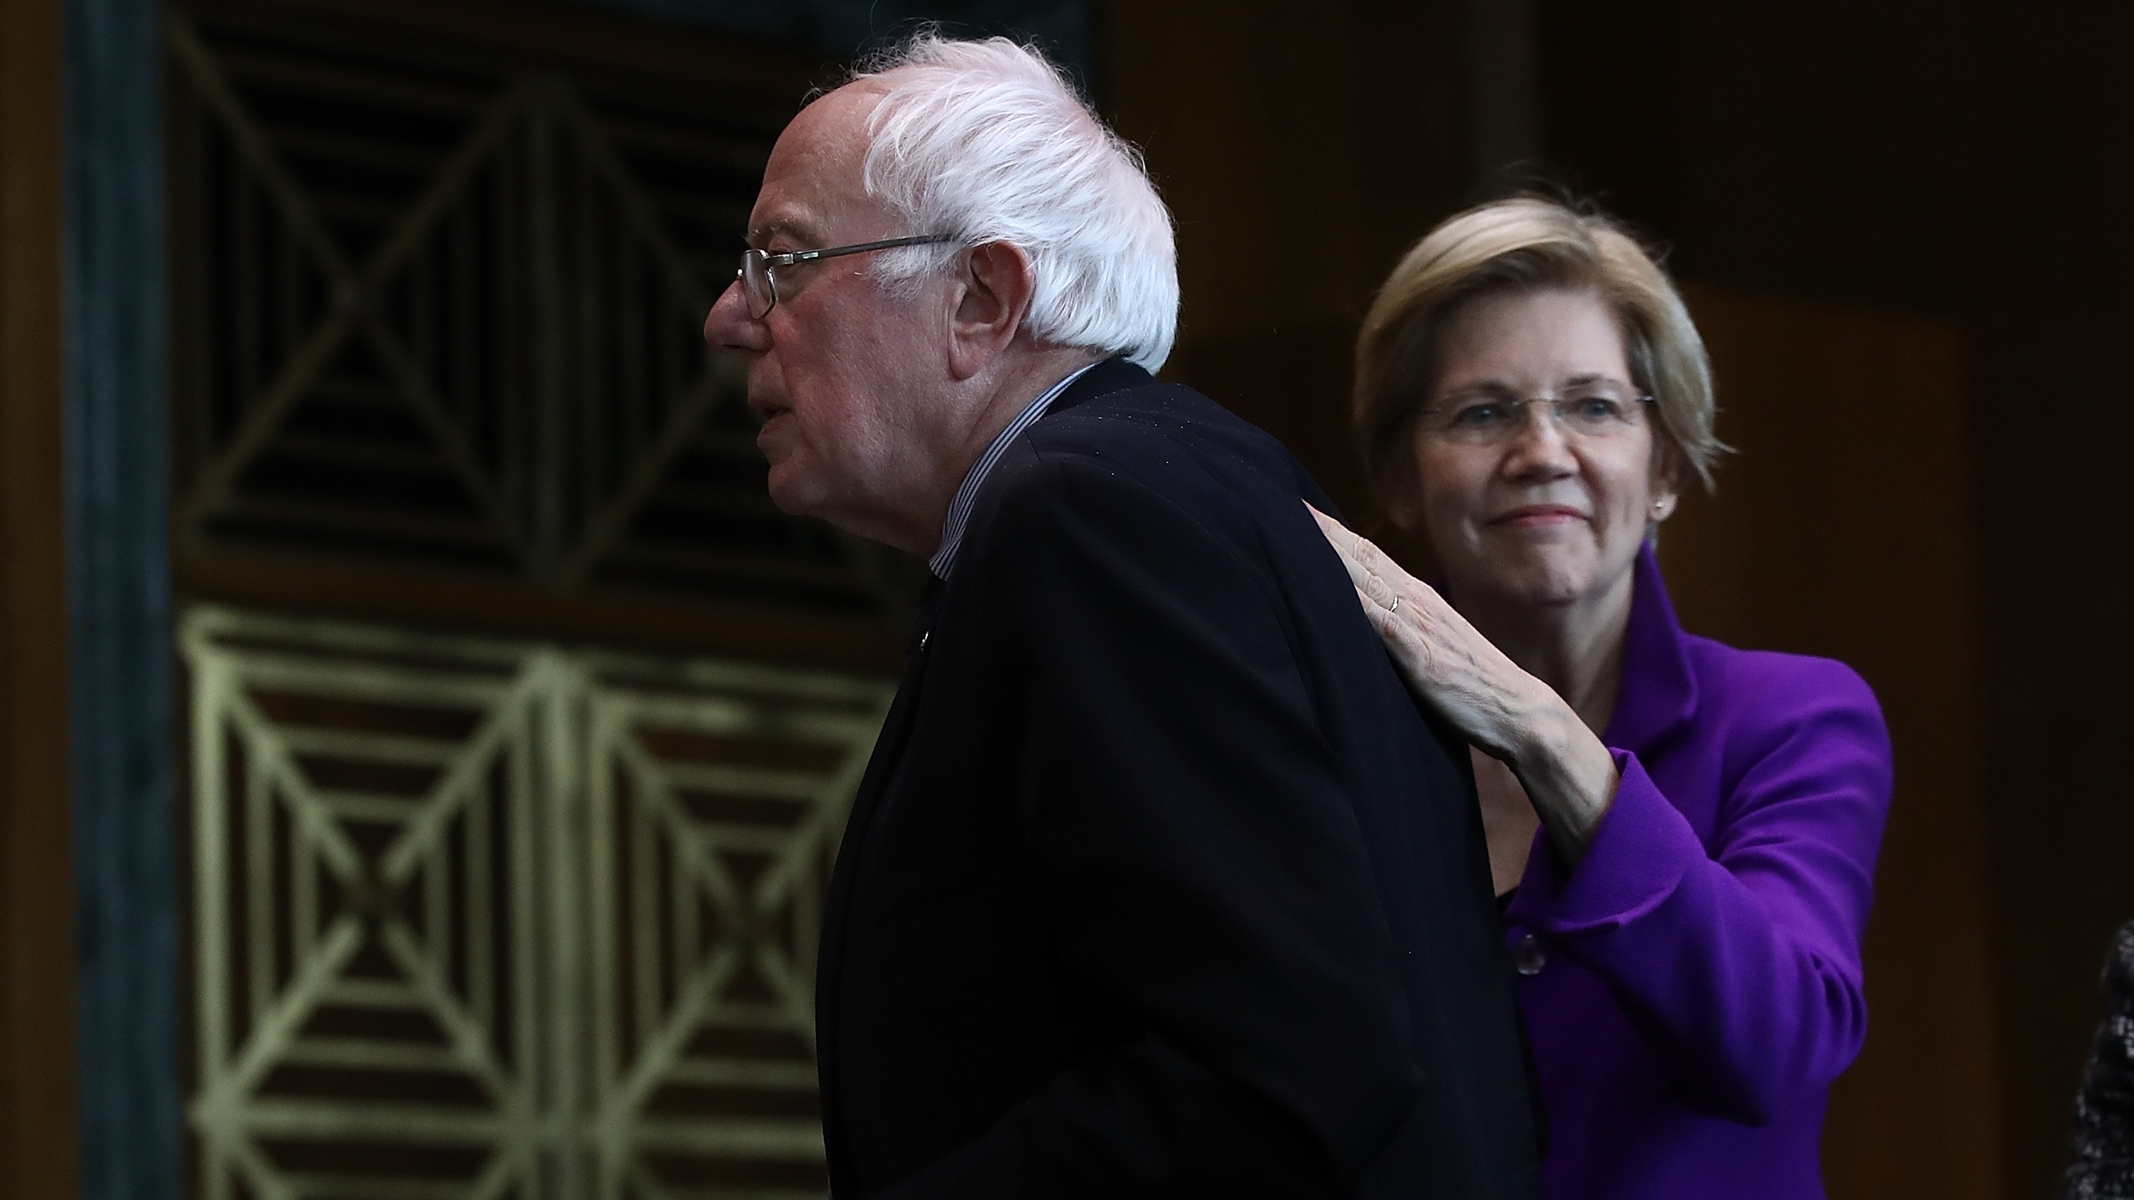 That Poll About 26% of Bernie Voters Preferring Trump to Warren Lacks Crucial Context